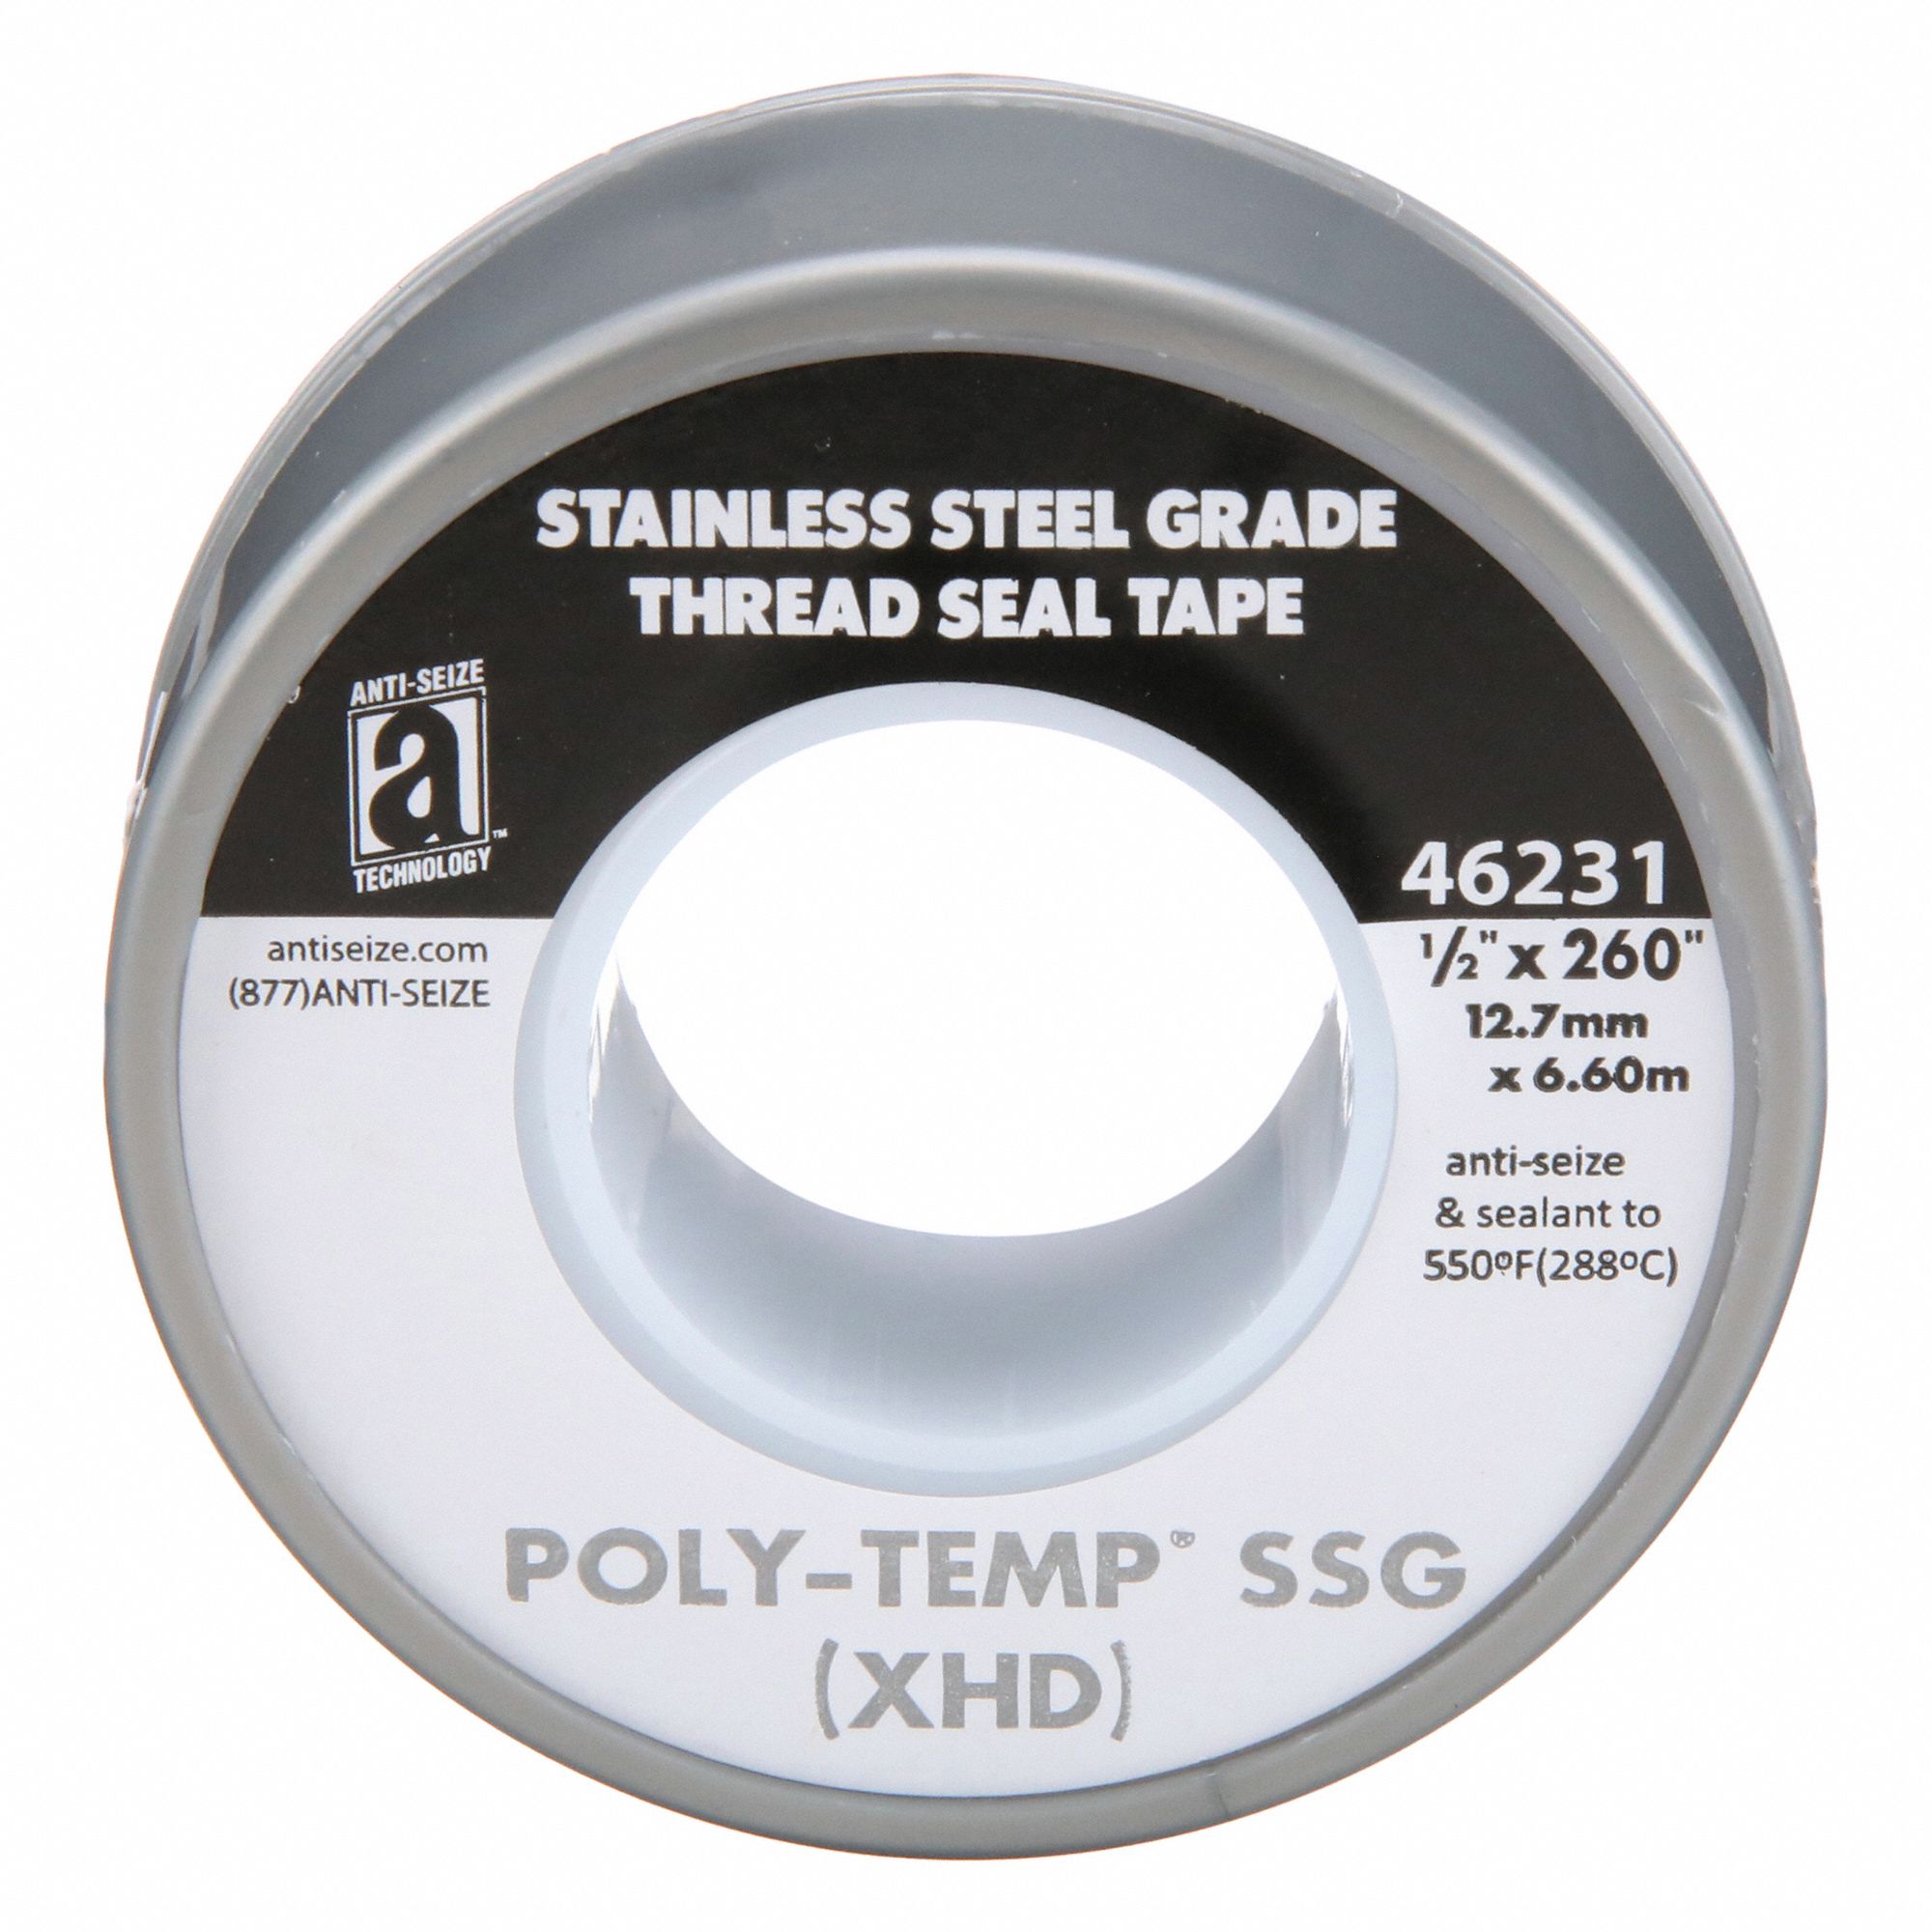 Oatey White Thread Seal Tape with PTFE - 31199